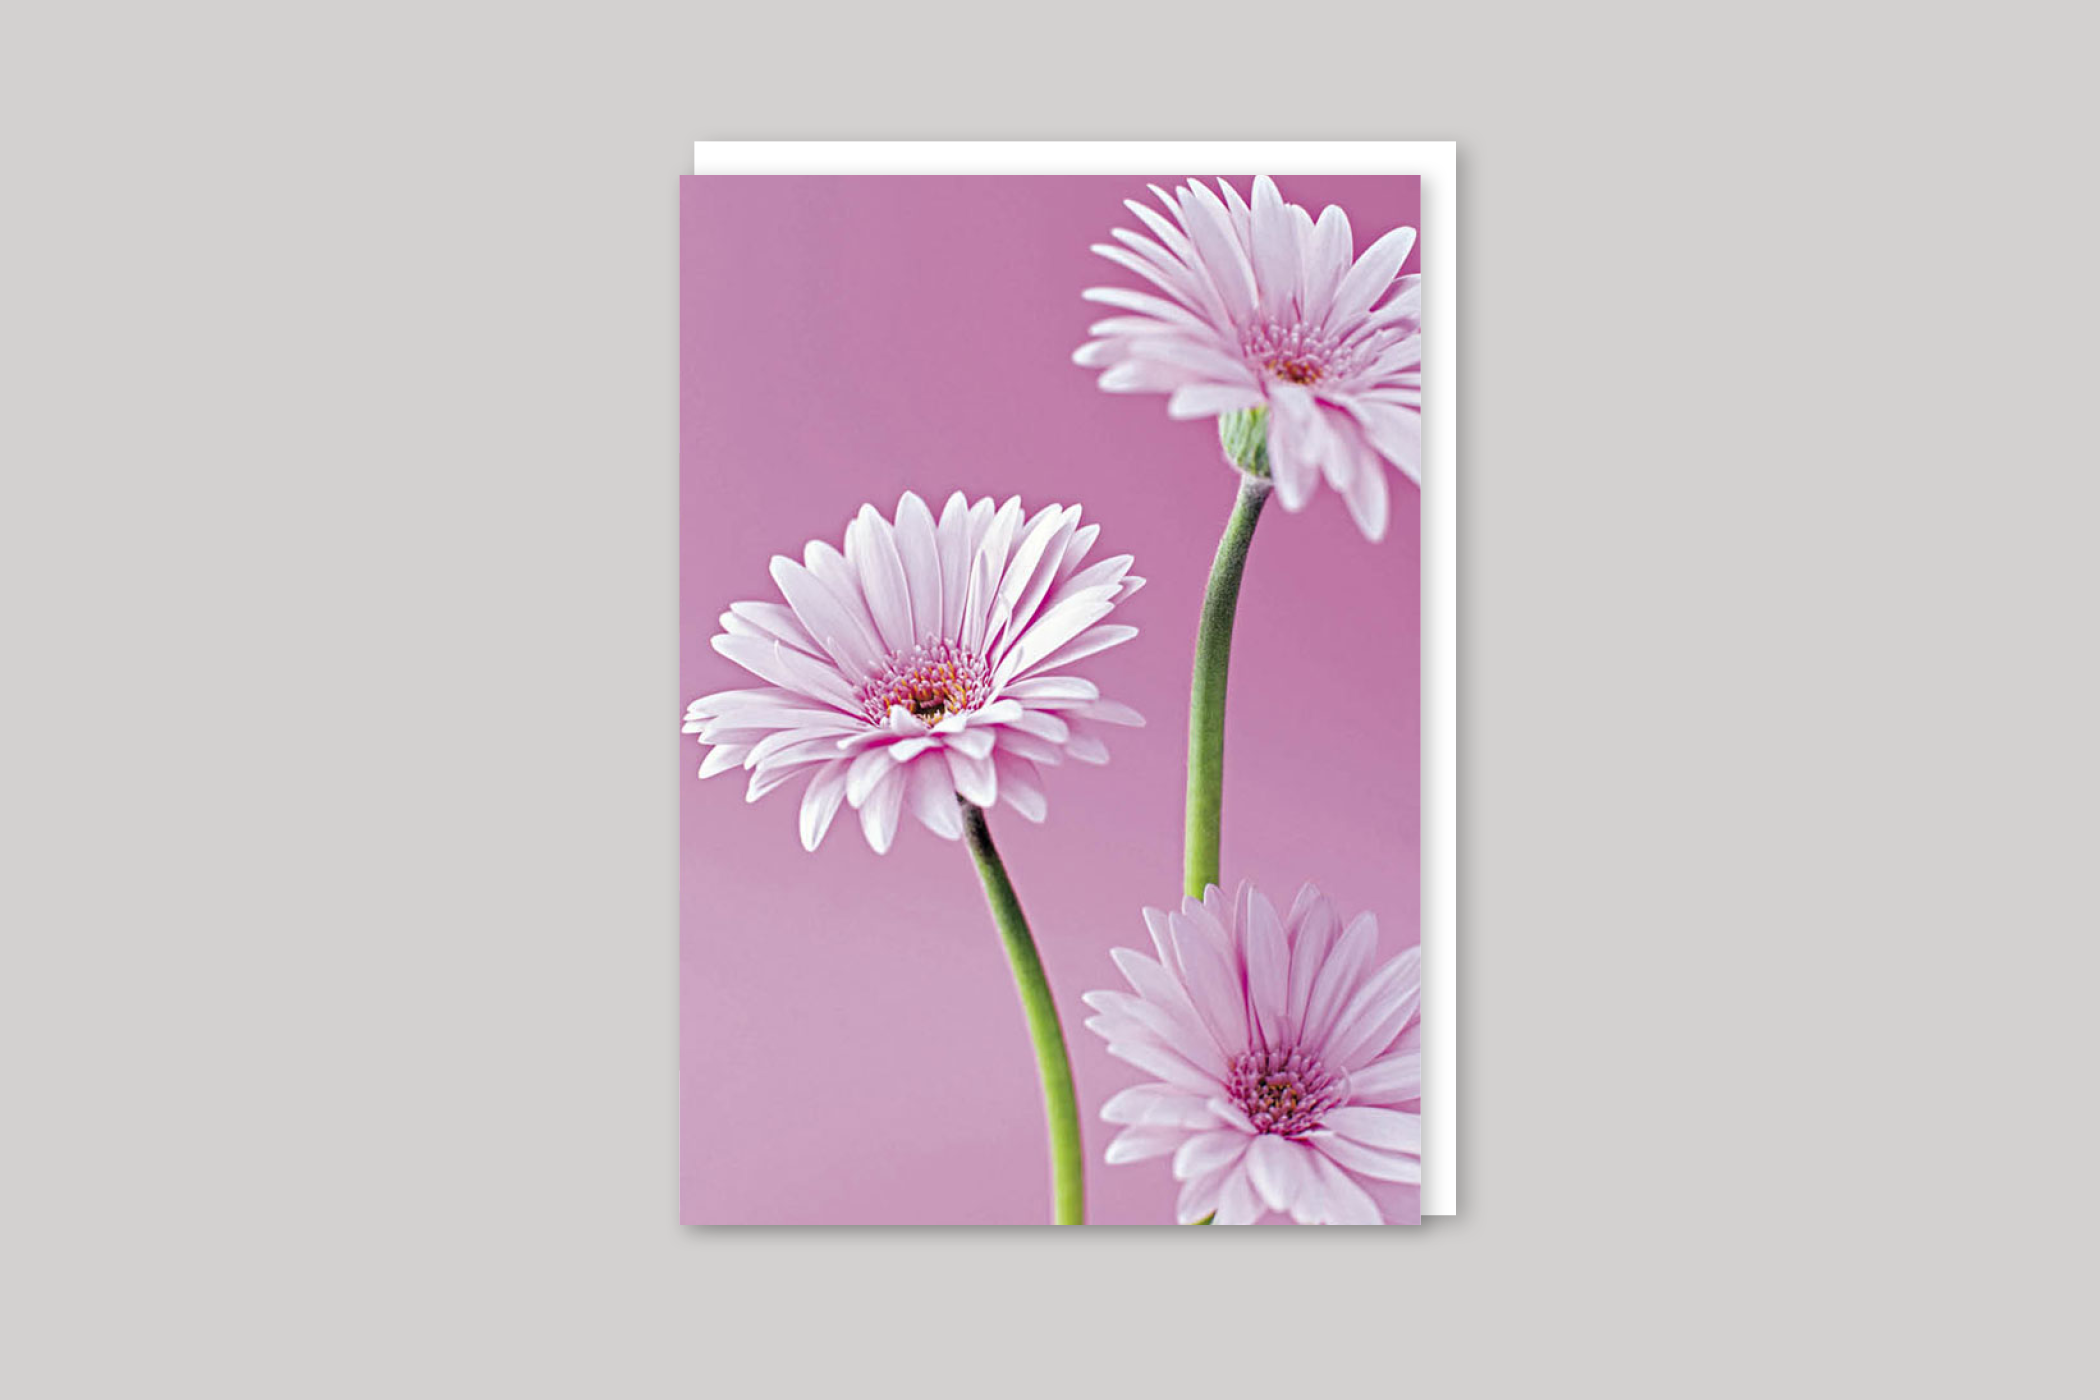 Gerberas thank you card from Exposure range of photographic cards by Icon, back page.